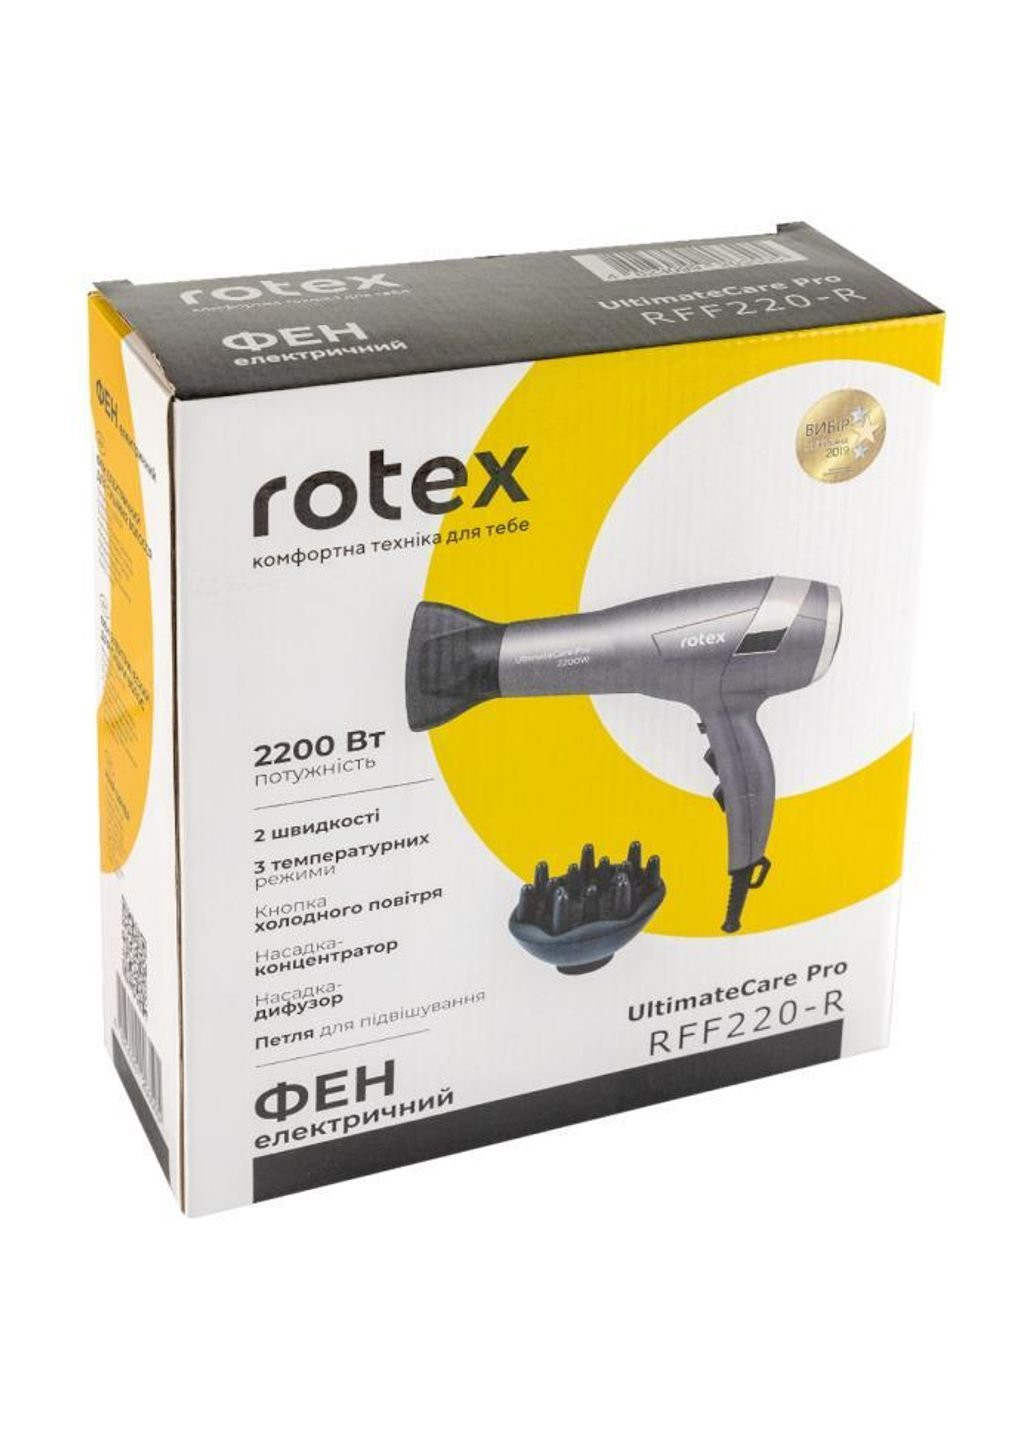 Фен Ultimate Care Pro 220-R 2200 Вт Rotex (253854398)